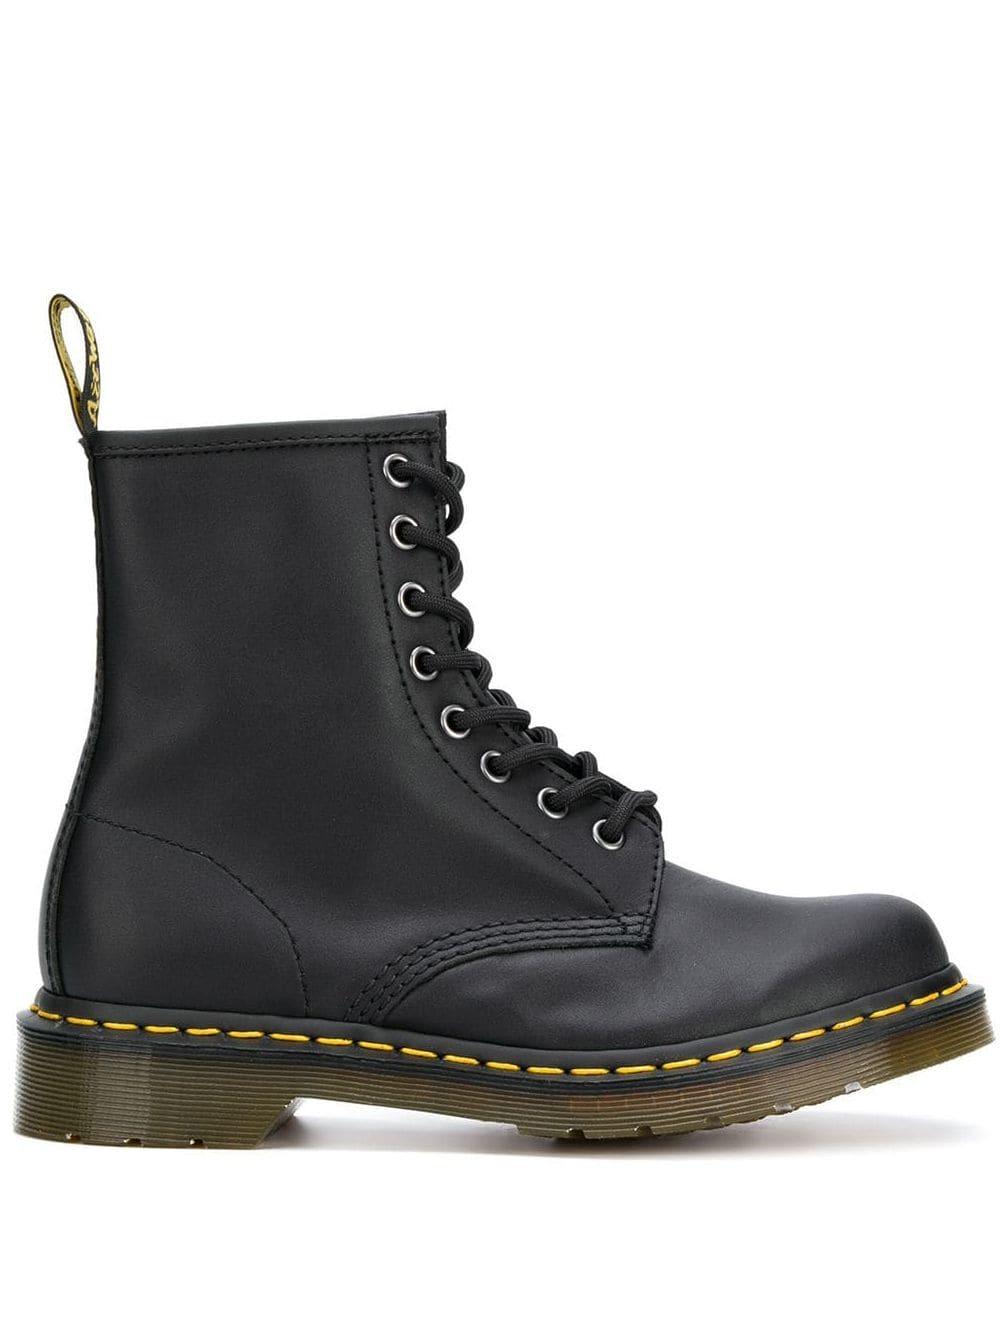 Dr. Martens Leather 1460 Pascal Virginia Boots in Black - Lyst